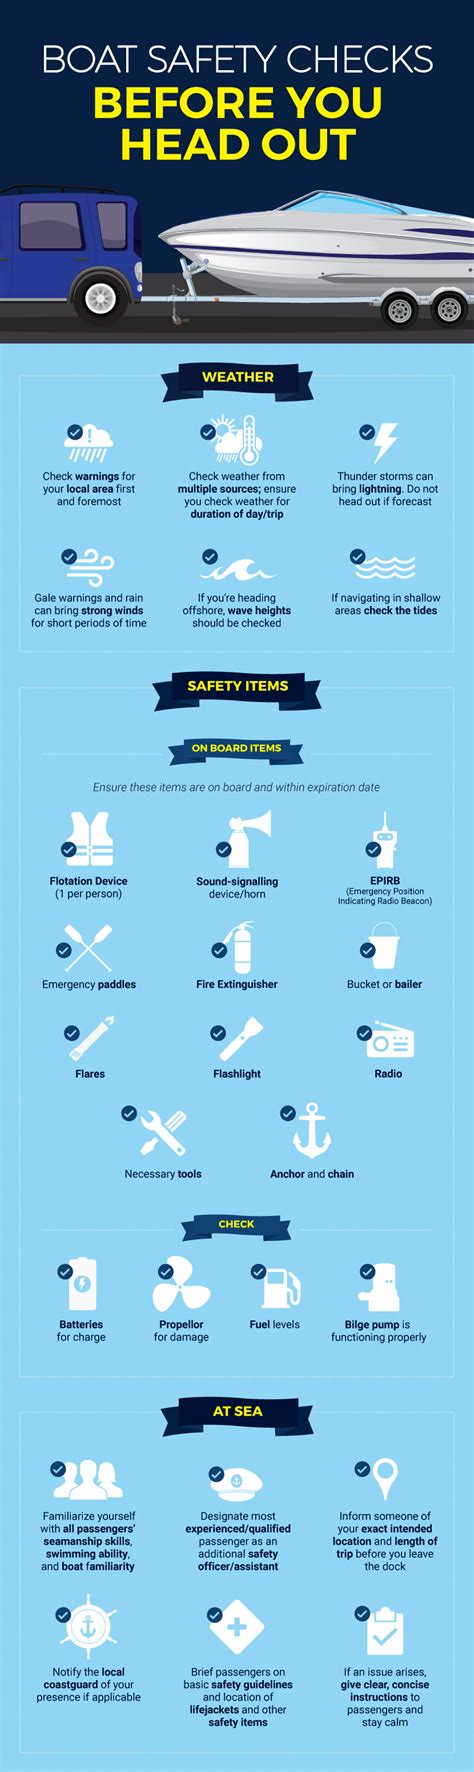 Boat Safety And Maintenance Tips